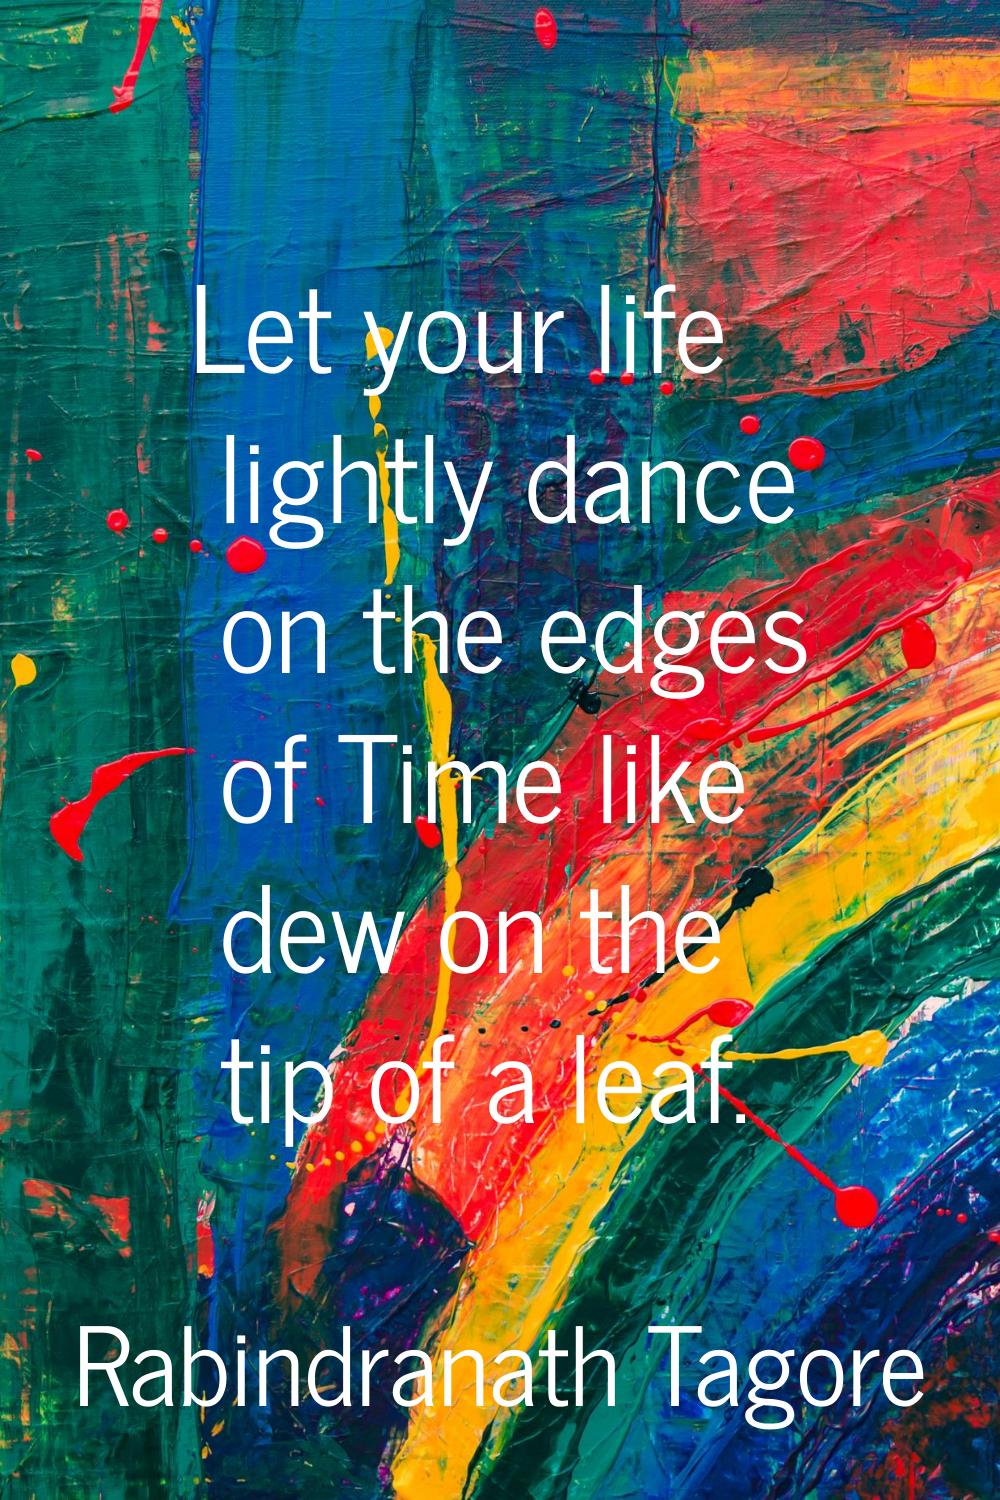 Let your life lightly dance on the edges of Time like dew on the tip of a leaf.